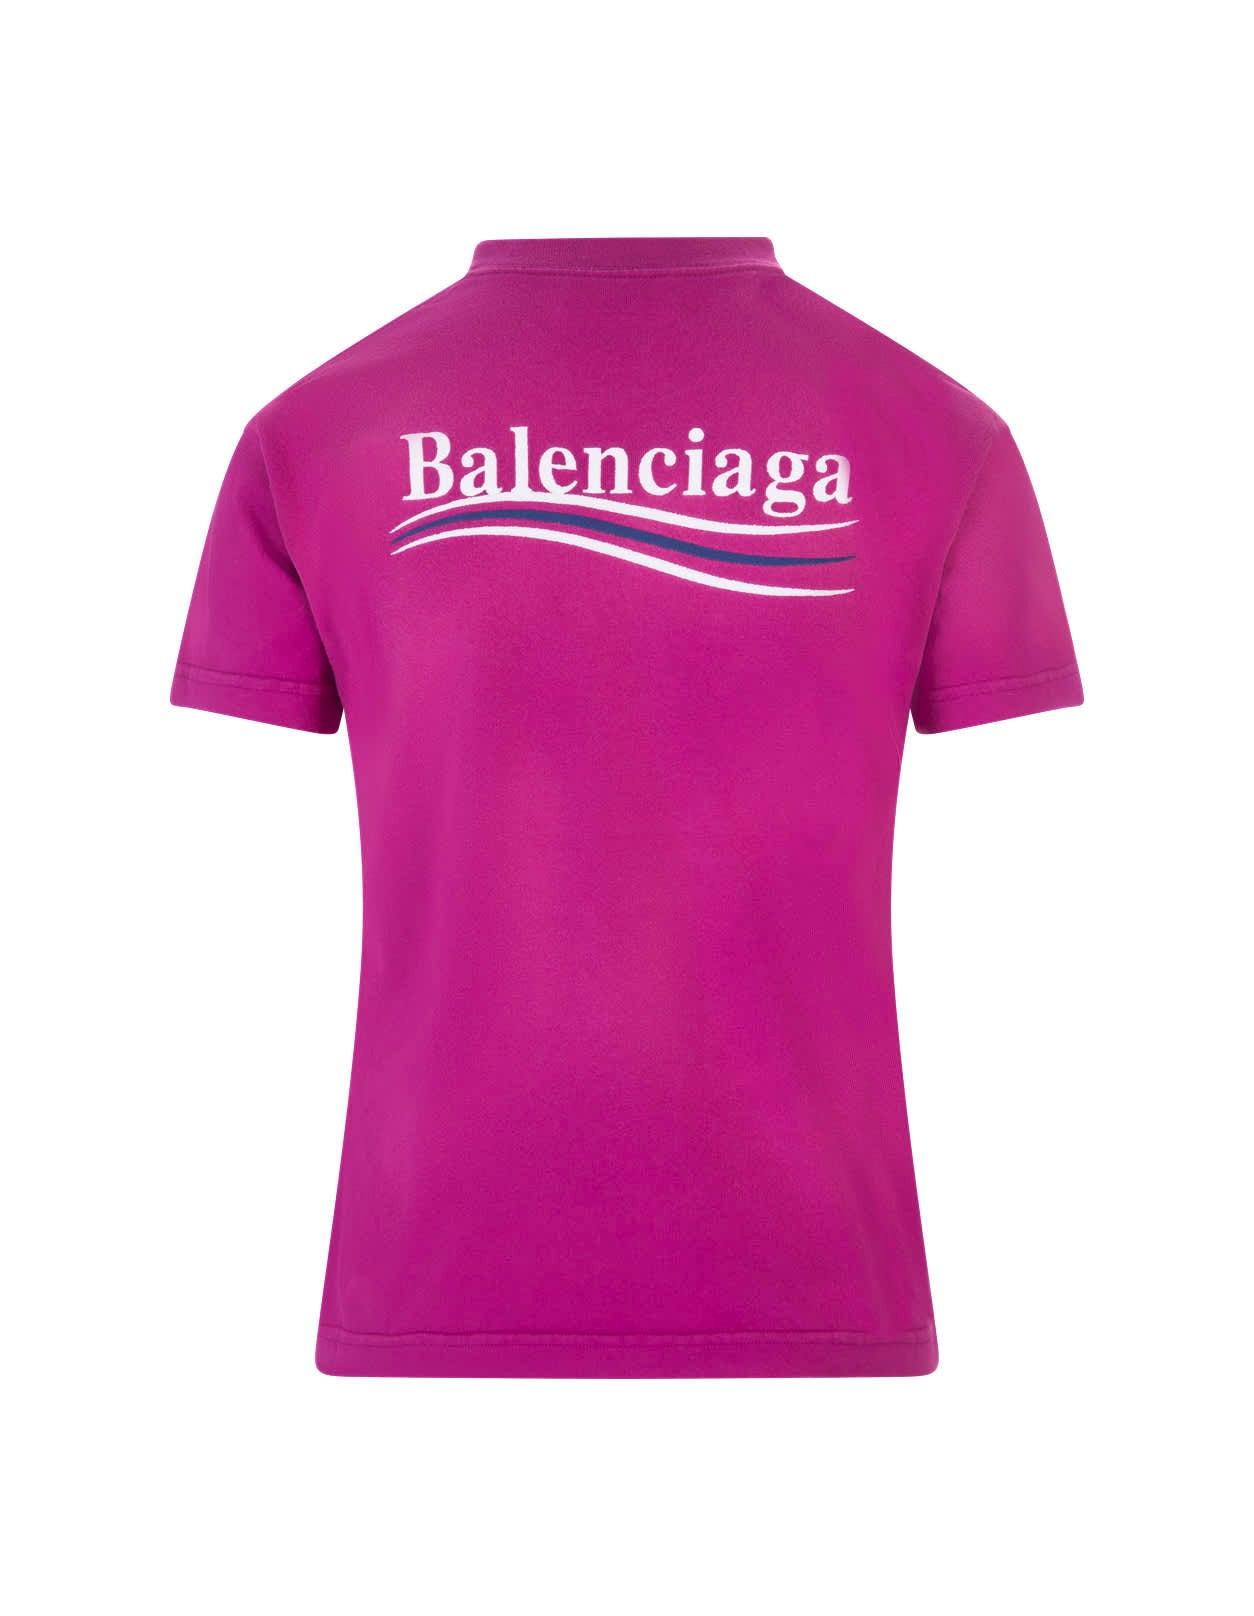 Balenciaga Cotton Woman Political Campaign Small Fit T-shirt in Magenta  (Pink) - Save 38% | Lyst